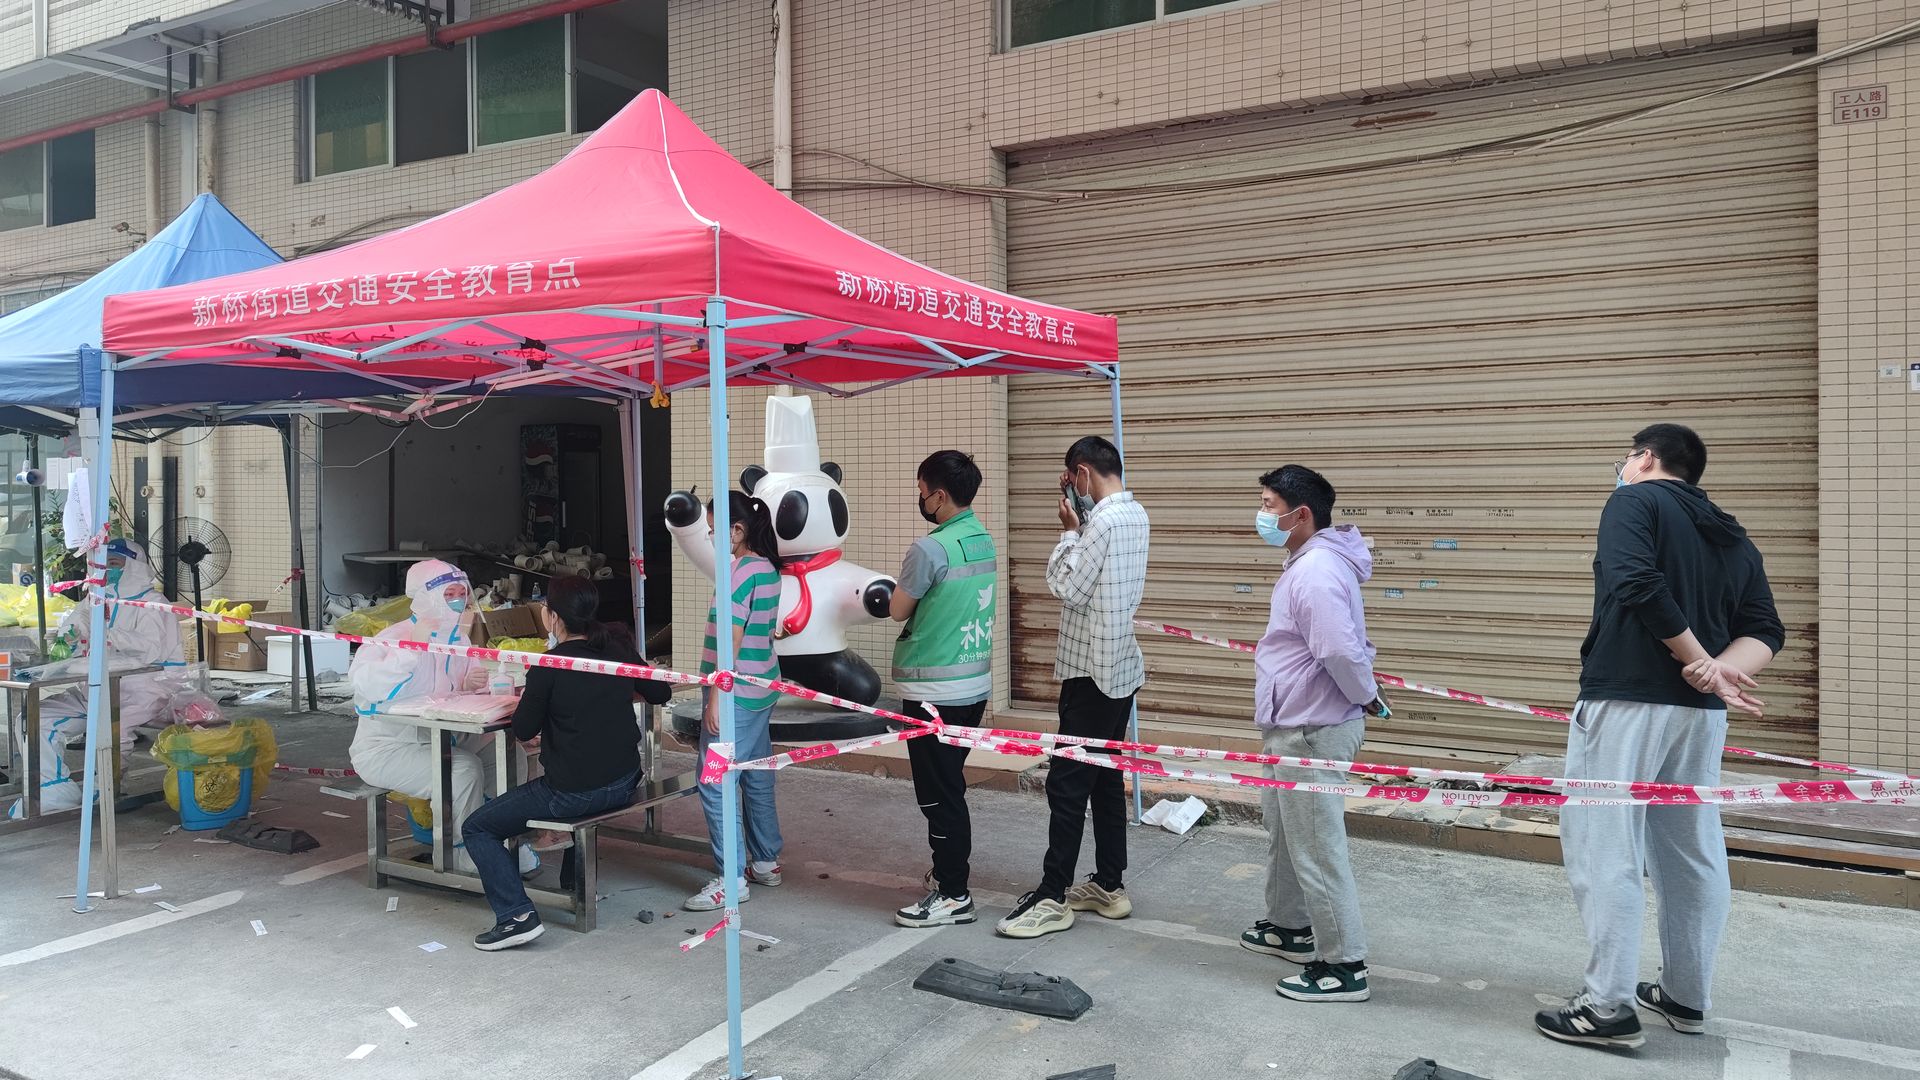 Local residents queue up for COVID-19 nucleic acid tests on March 13, 2022 in Shenzhen, Guangdong Province of China. 